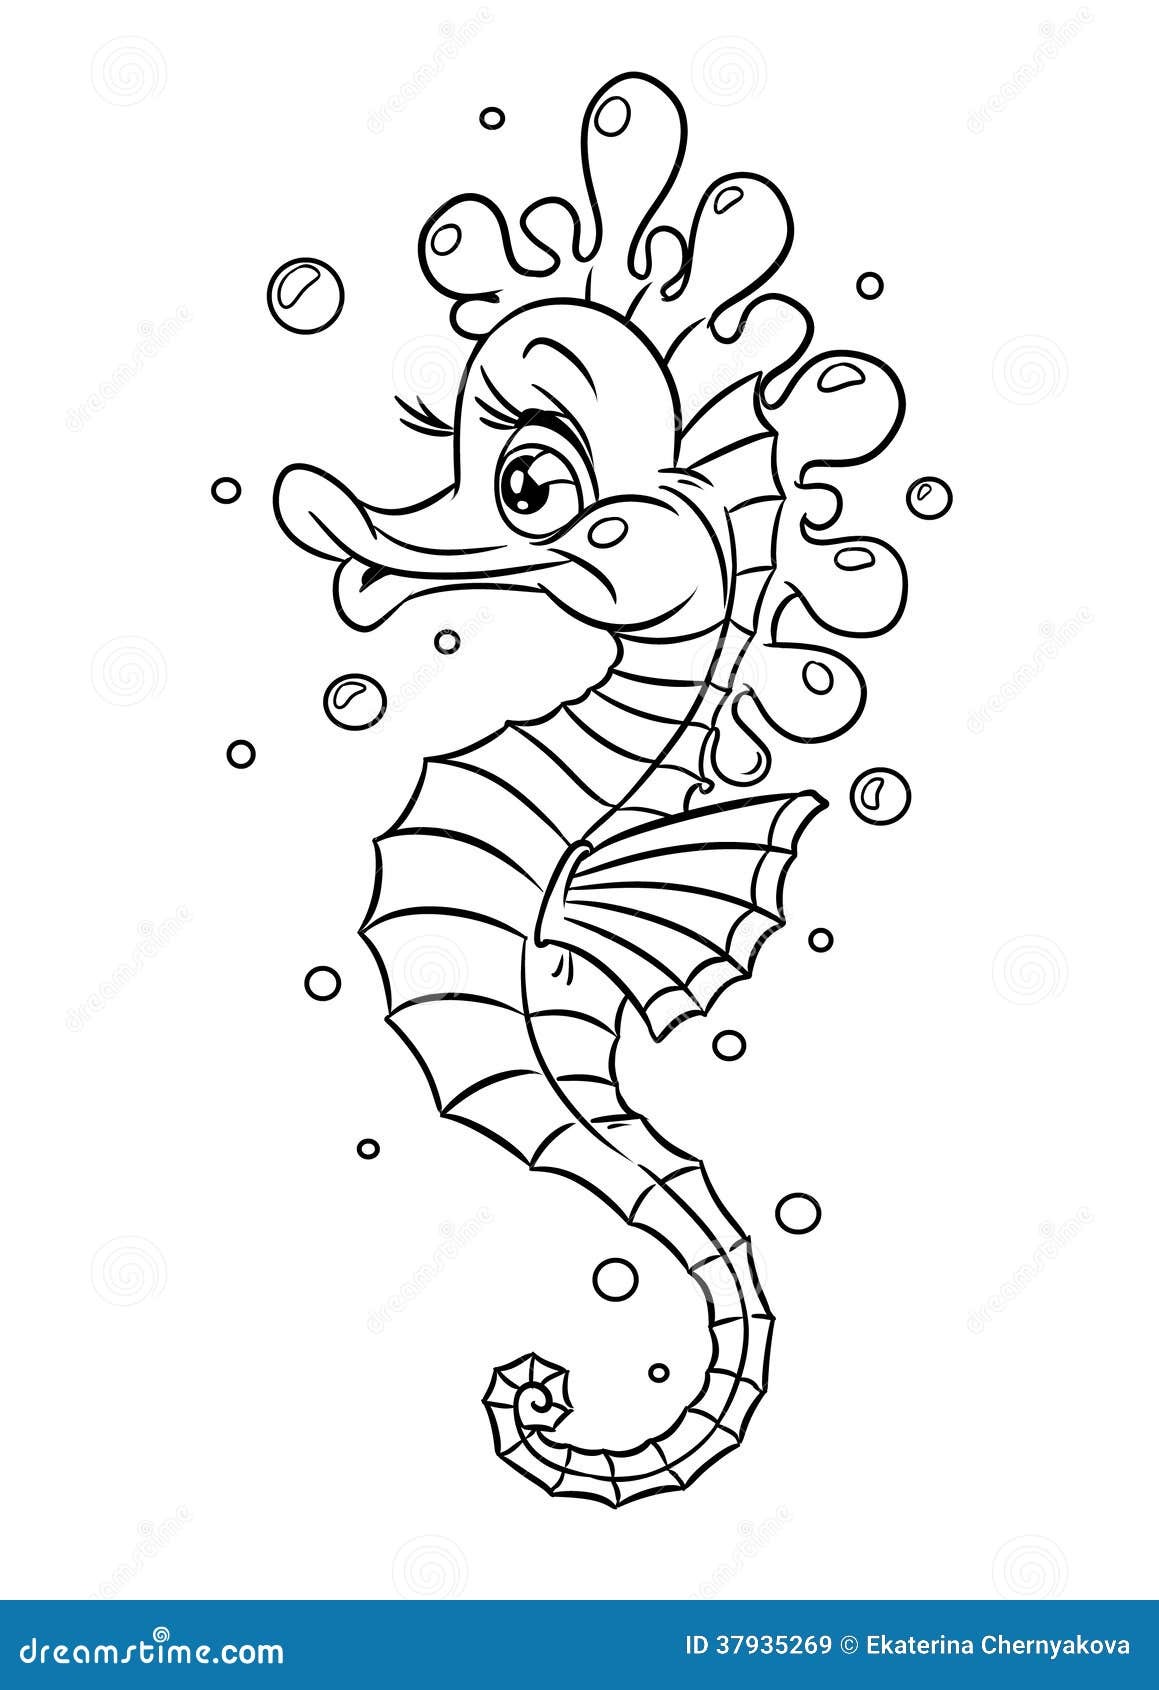 Fish Sea Horse Coloring Pages Stock Illustration Illustration Of Smile Pages 37935269